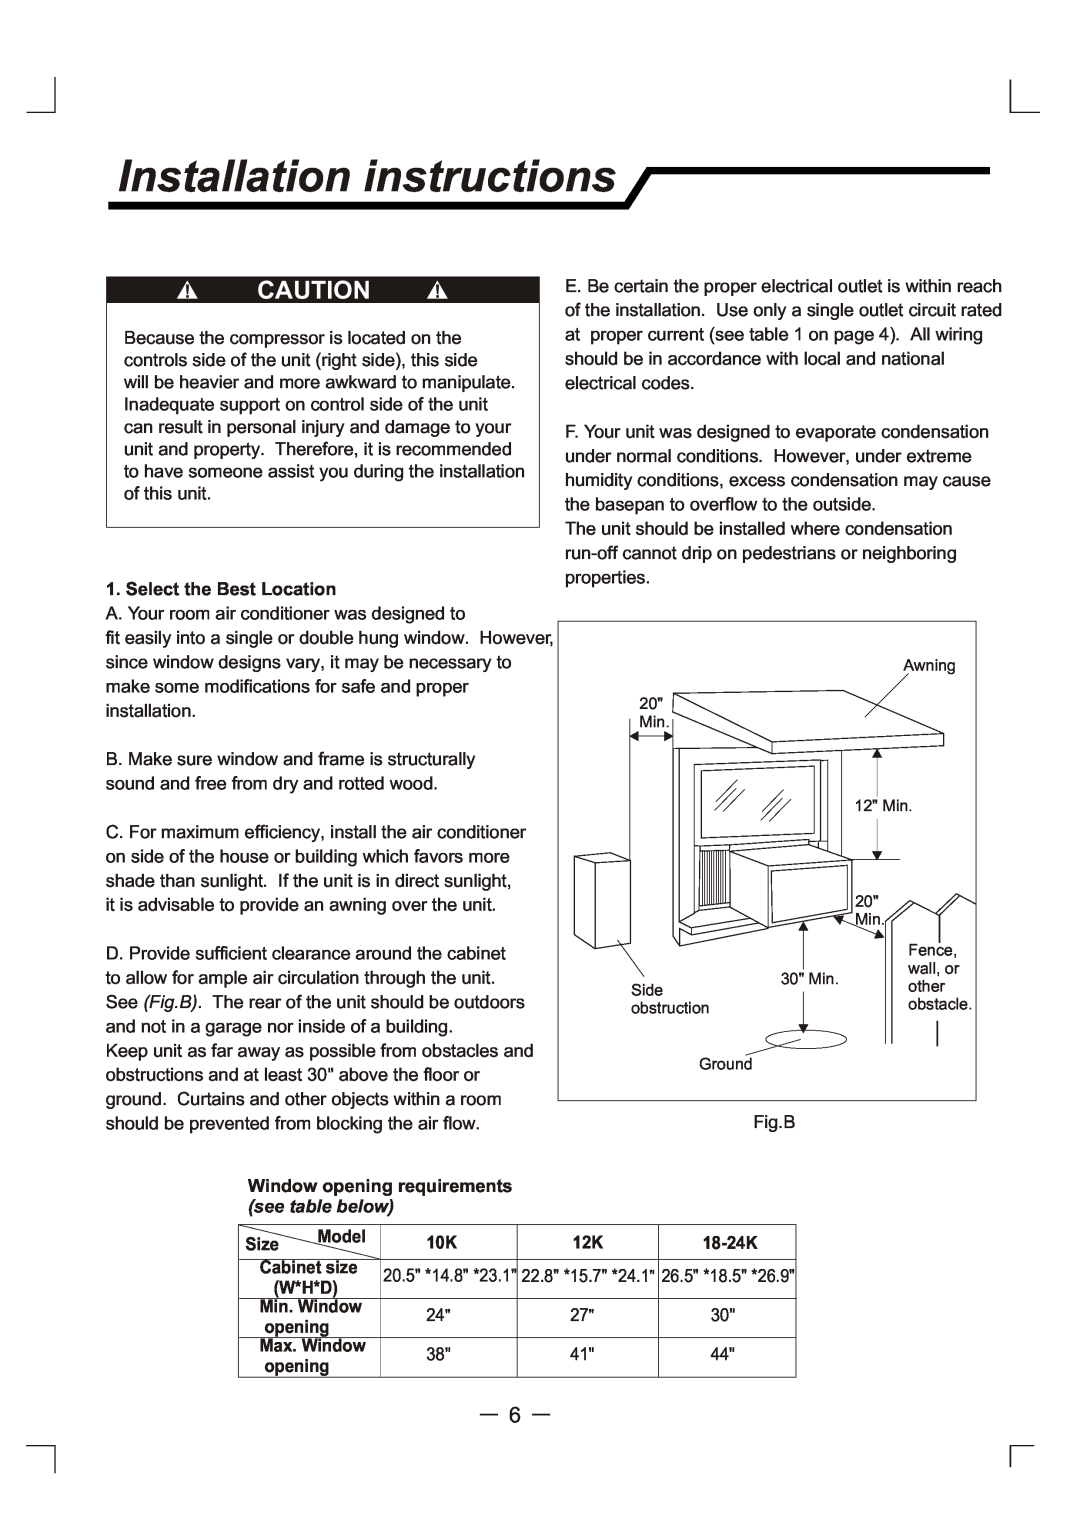 Admiral AAW-10DR3FHU Installation instructions, Select the Best Location, Window opening requirements, see table below 